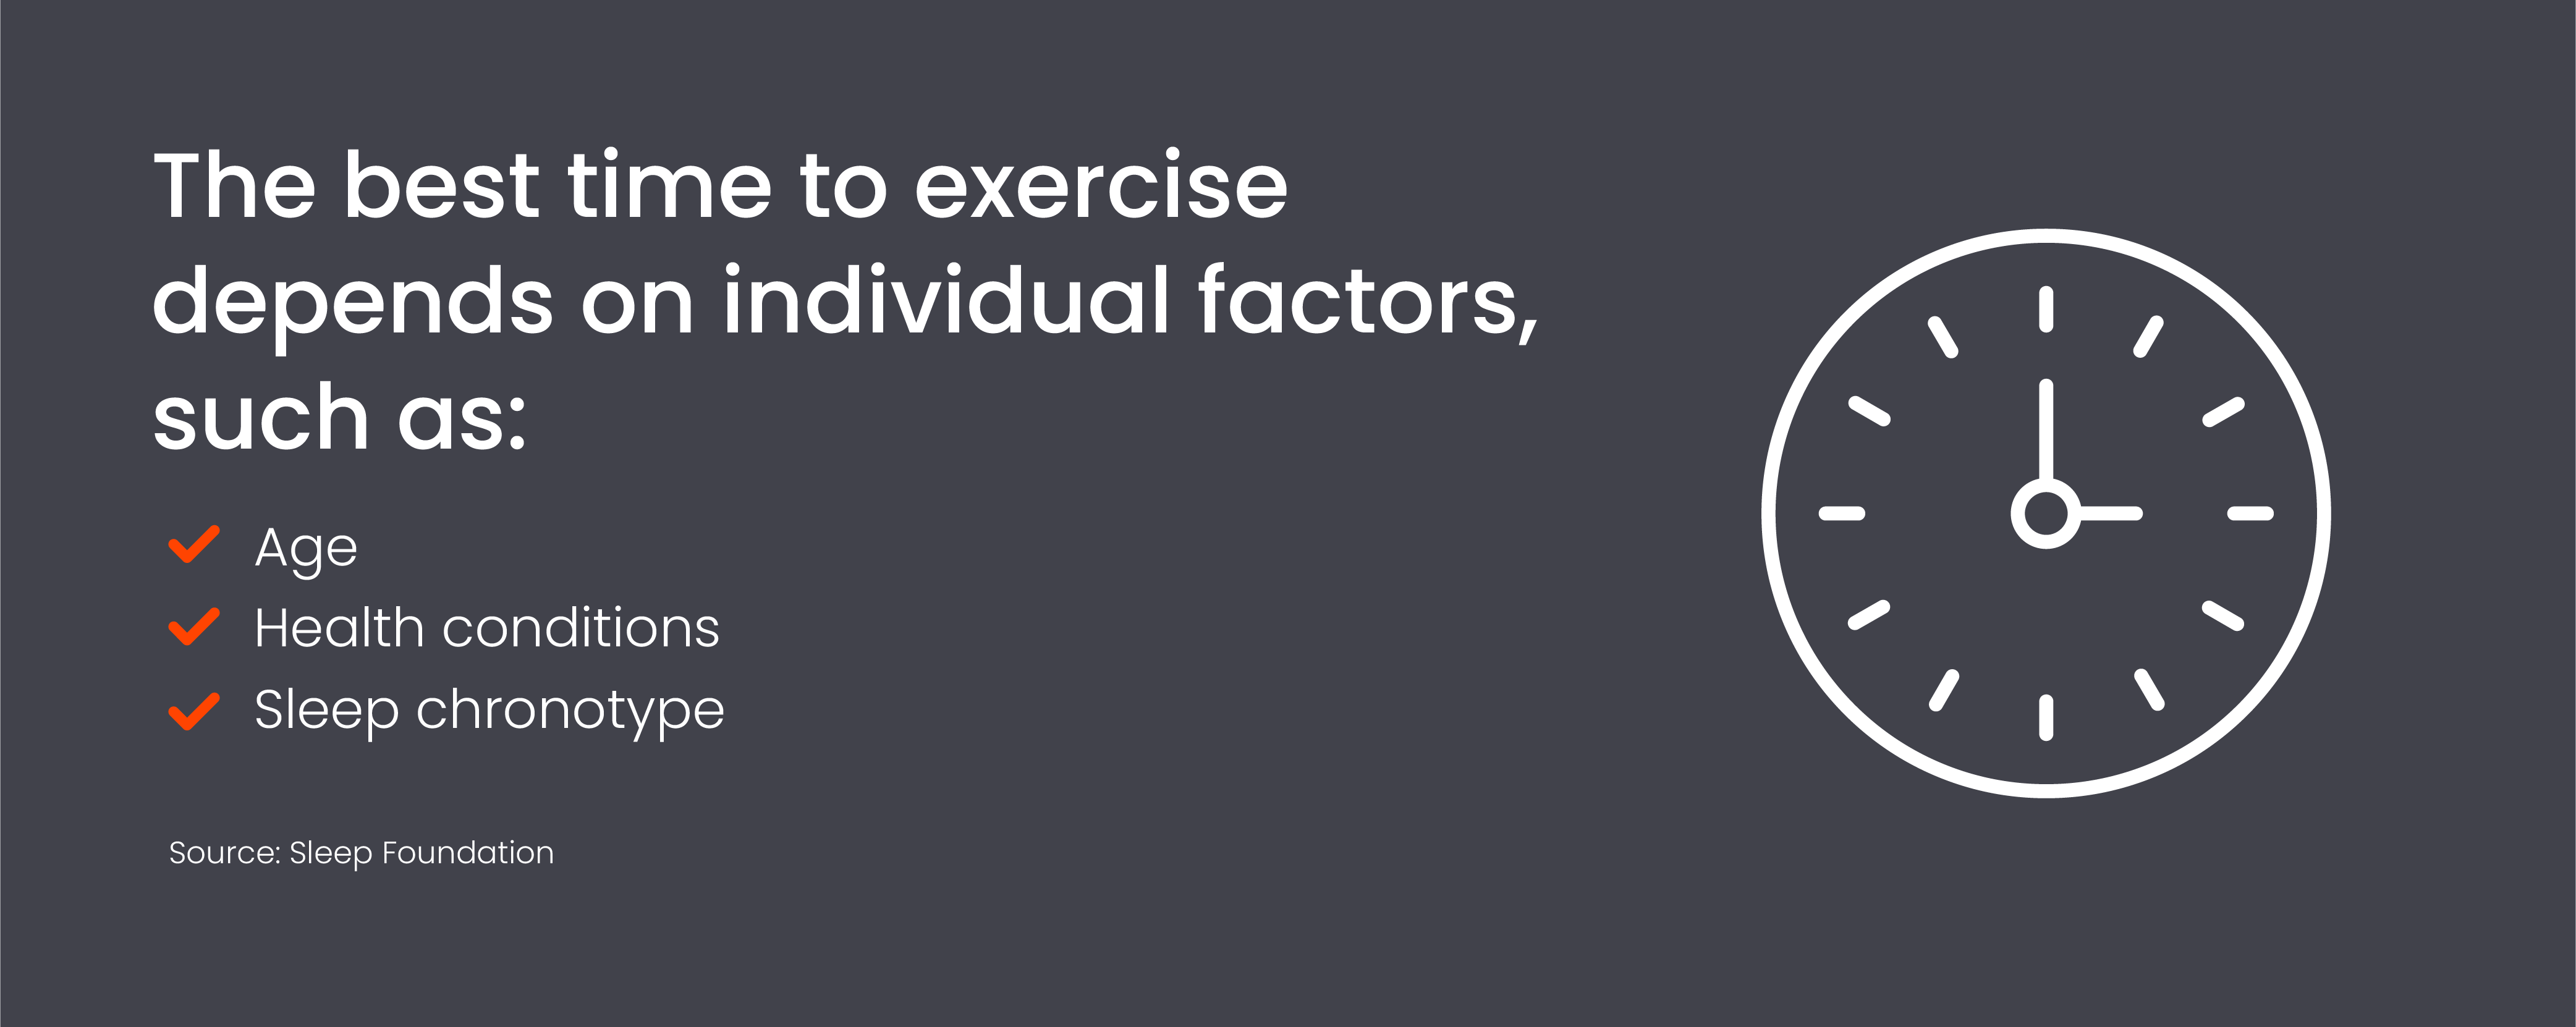 The best time to exercise depends on individual factors like age, health conditions, and sleep chronotype